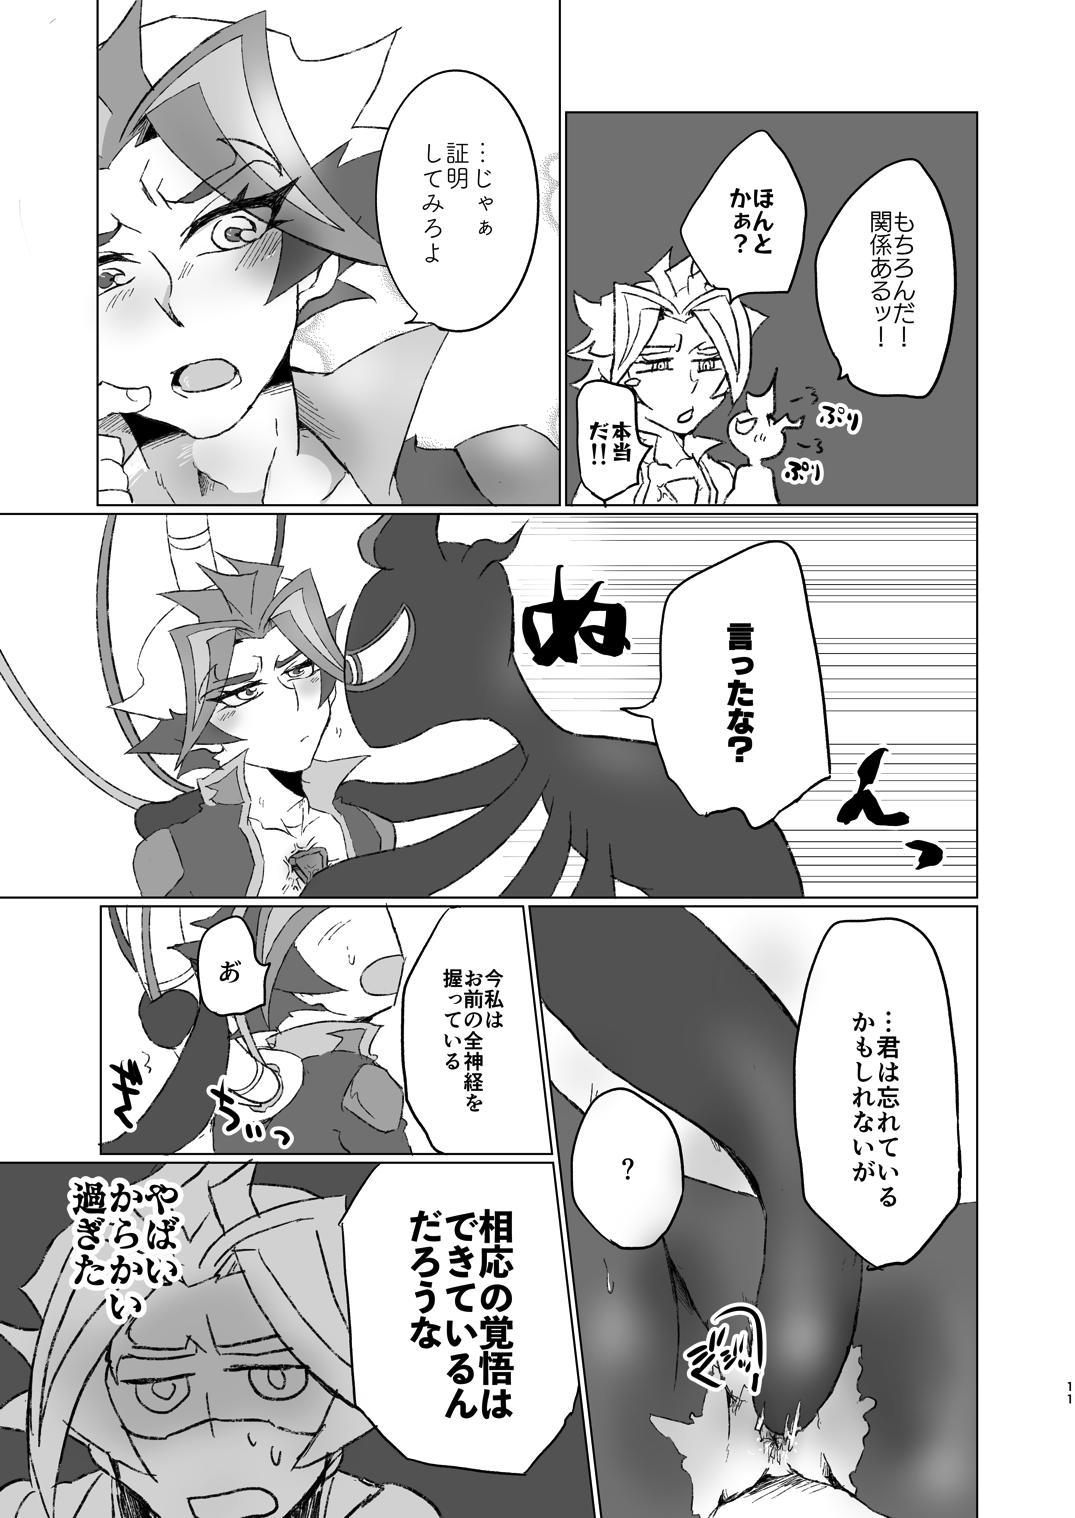 Tia A little bit further - Yu-gi-oh vrains Coeds - Page 10